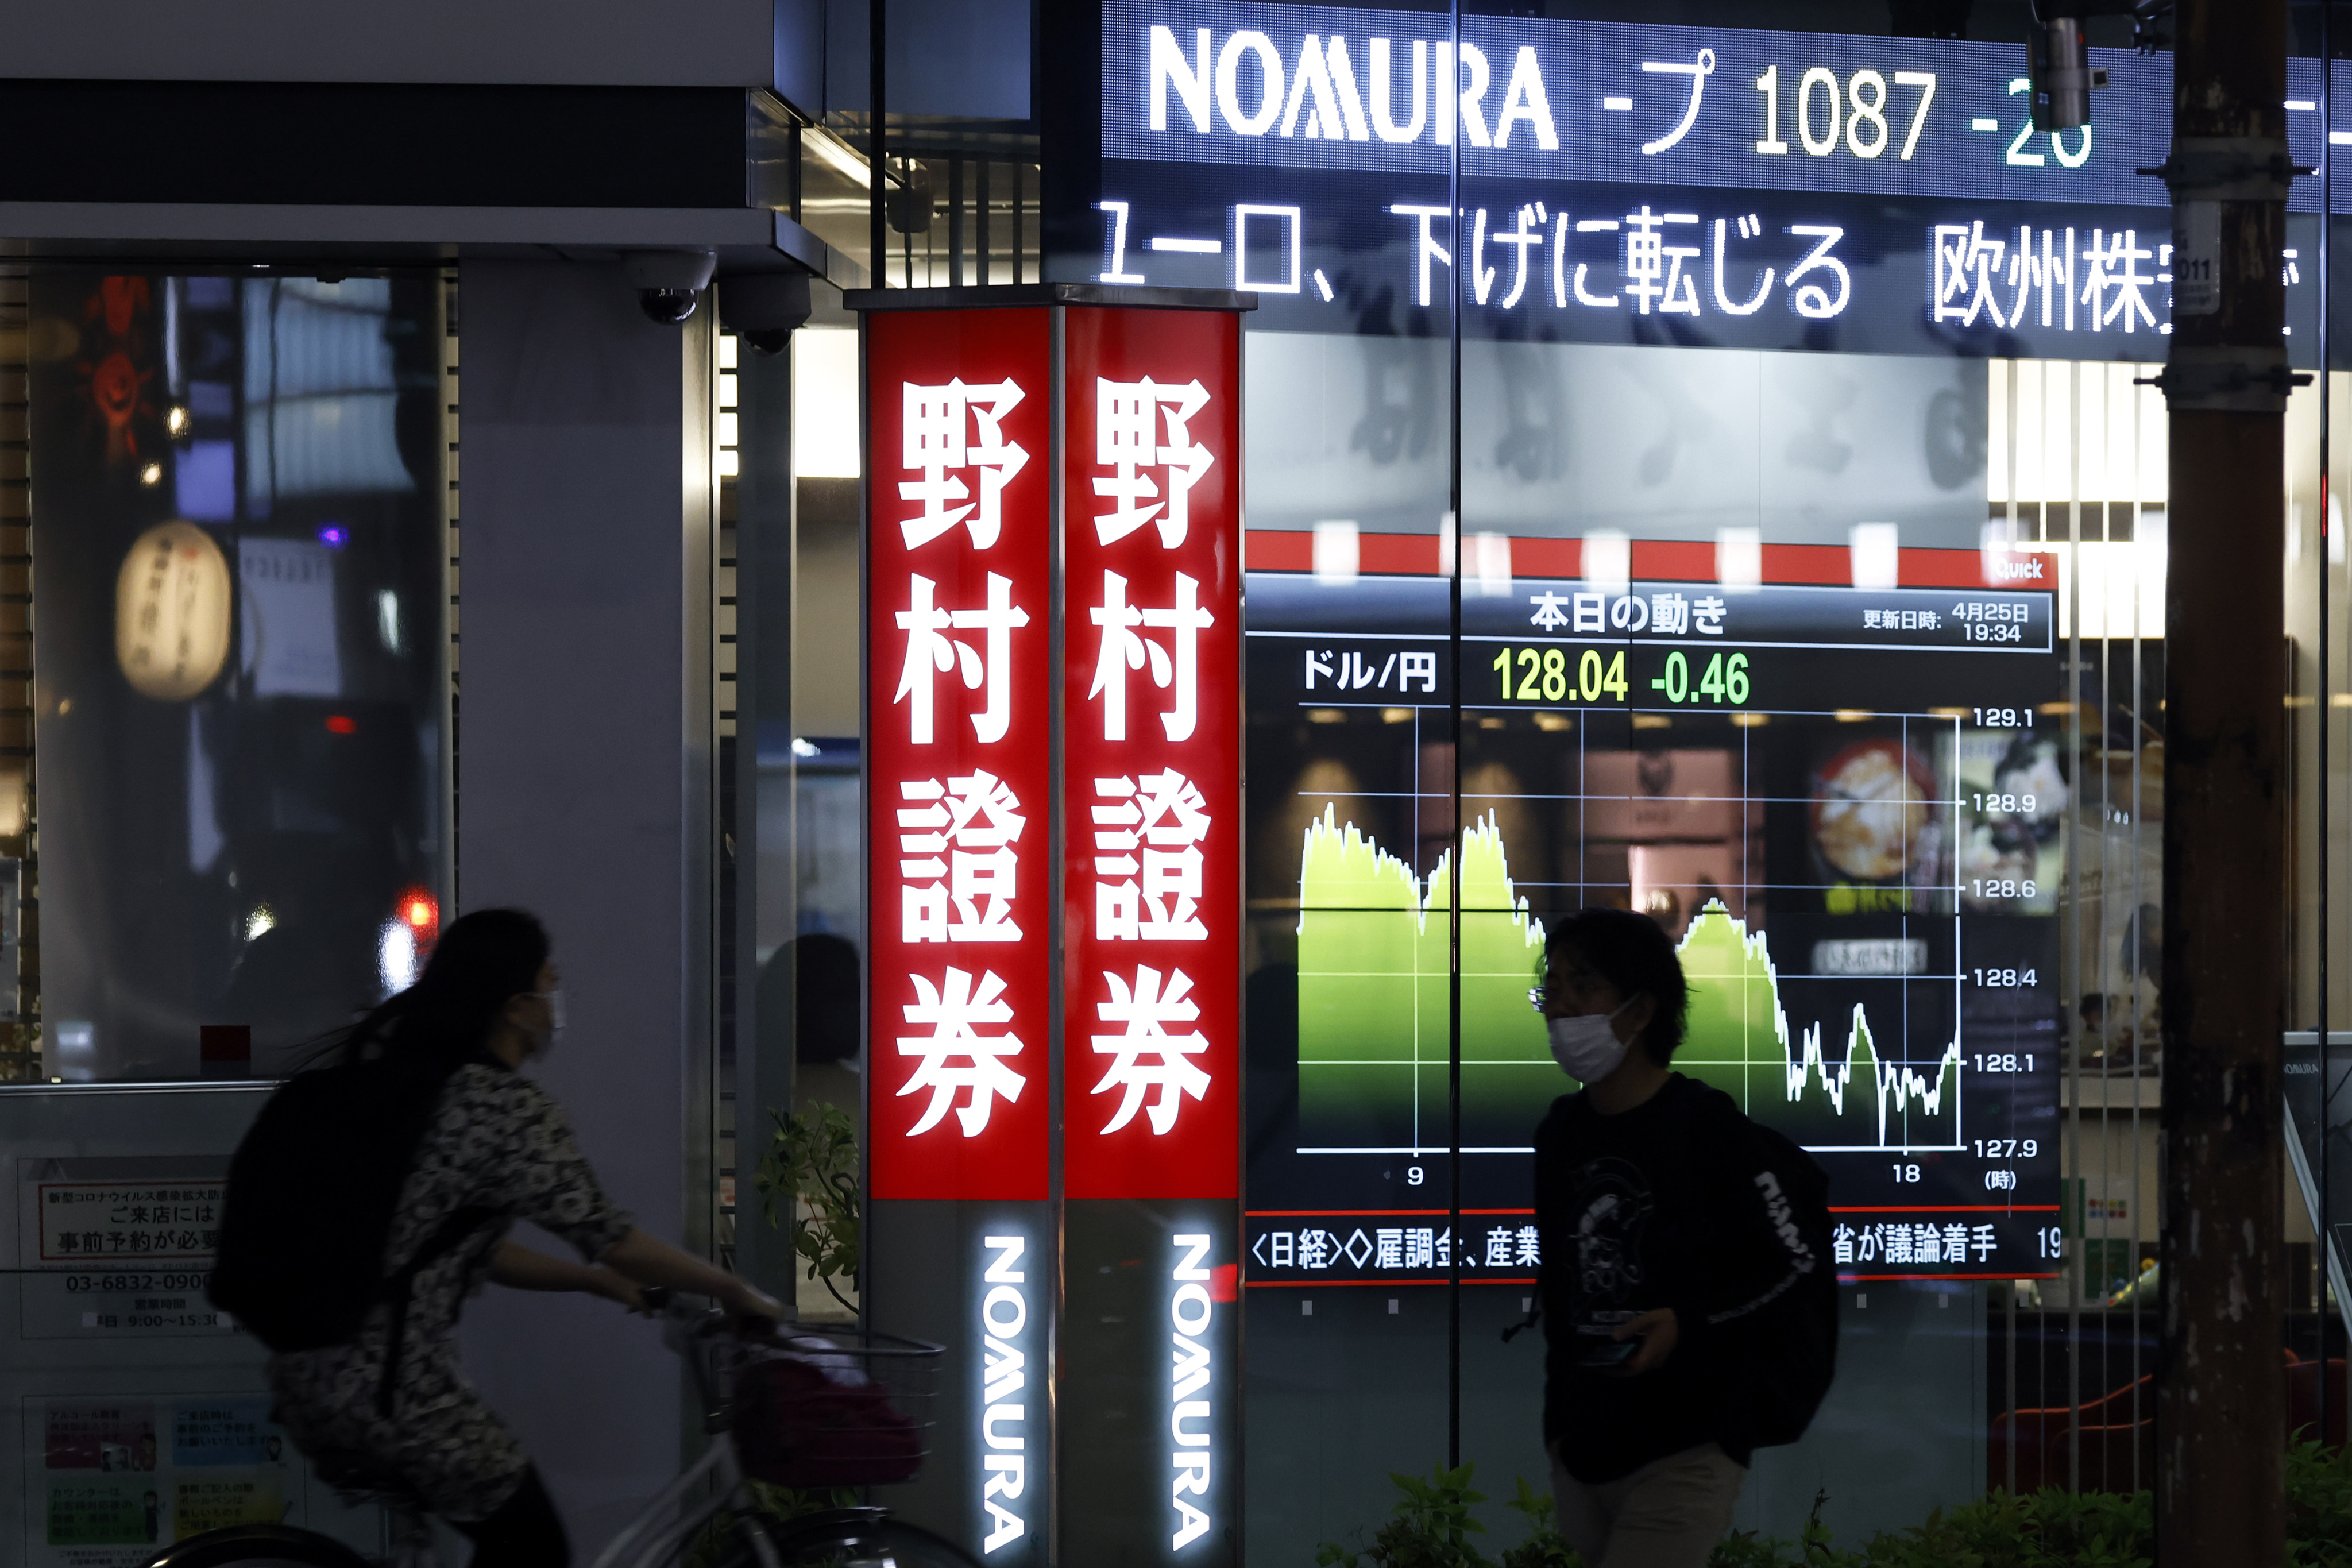 Illuminated signage for Nomura Securities, a unit of Nomura Holdings, displayed outside one of the company’s branches at night in Tokyo on April 25, 2022. Photo: Bloomberg